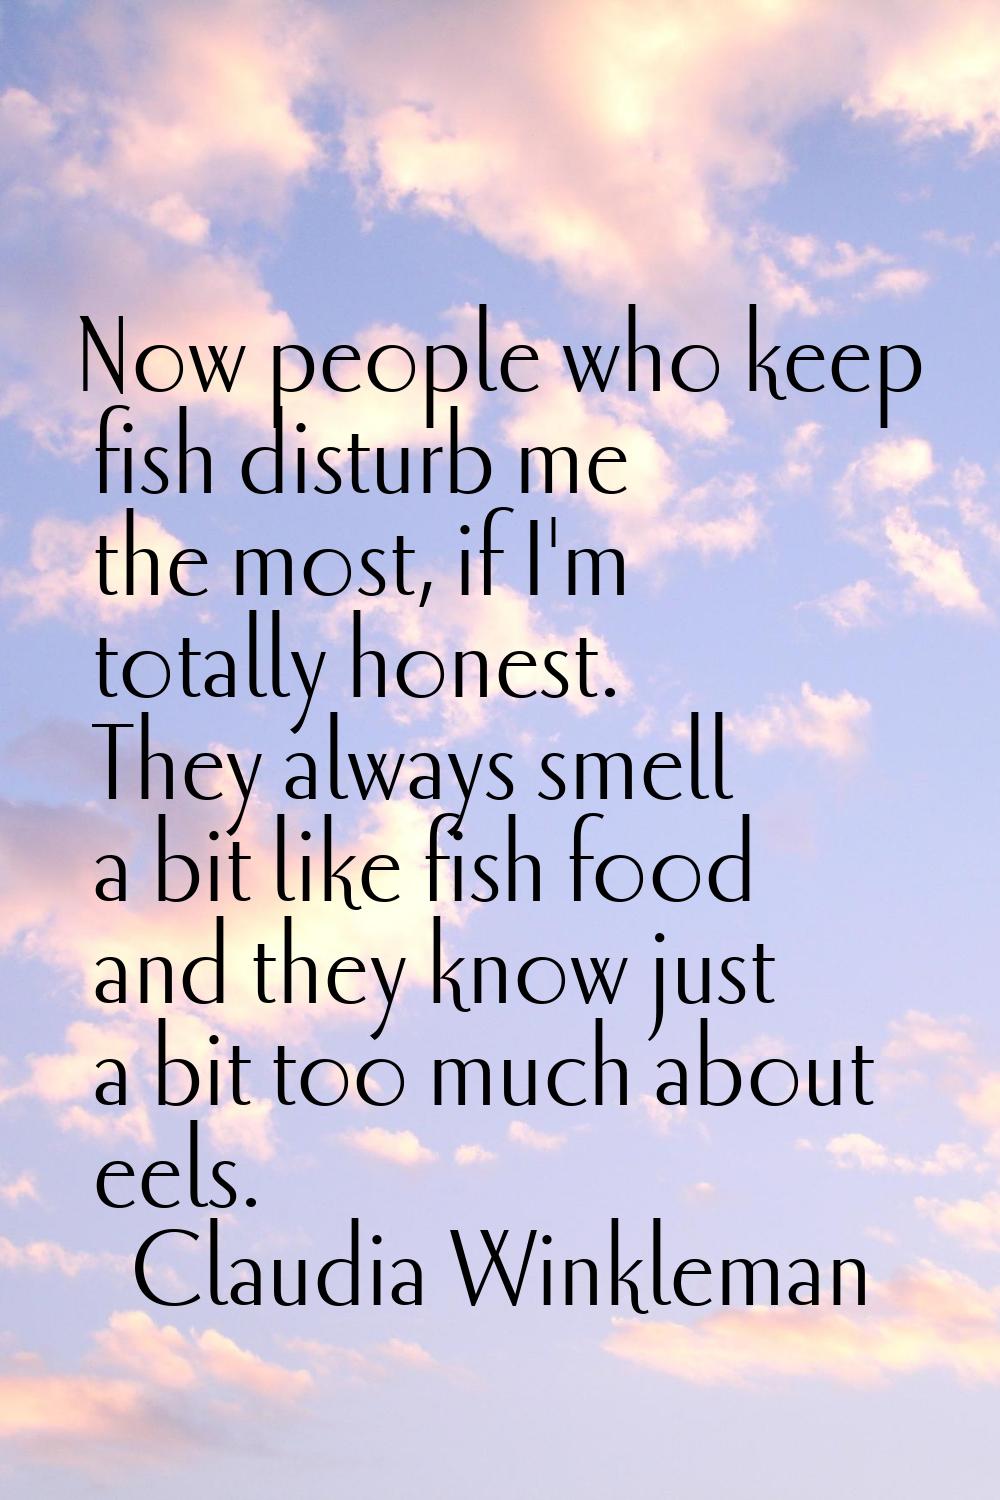 Now people who keep fish disturb me the most, if I'm totally honest. They always smell a bit like f